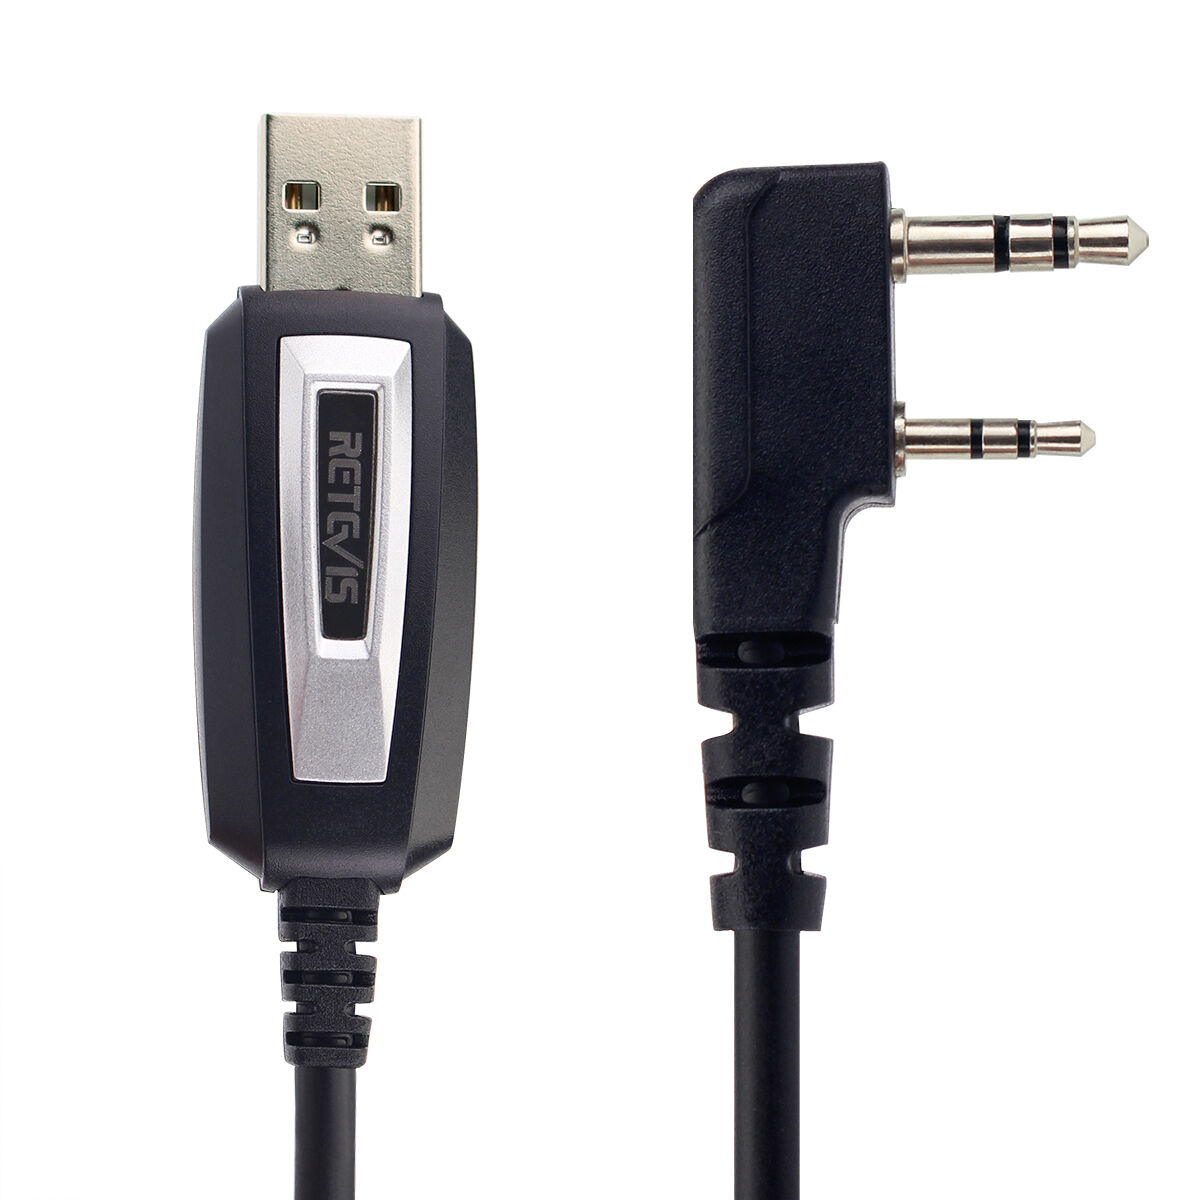 USB Programming Cable for Baofeng Kenwood Wouxun